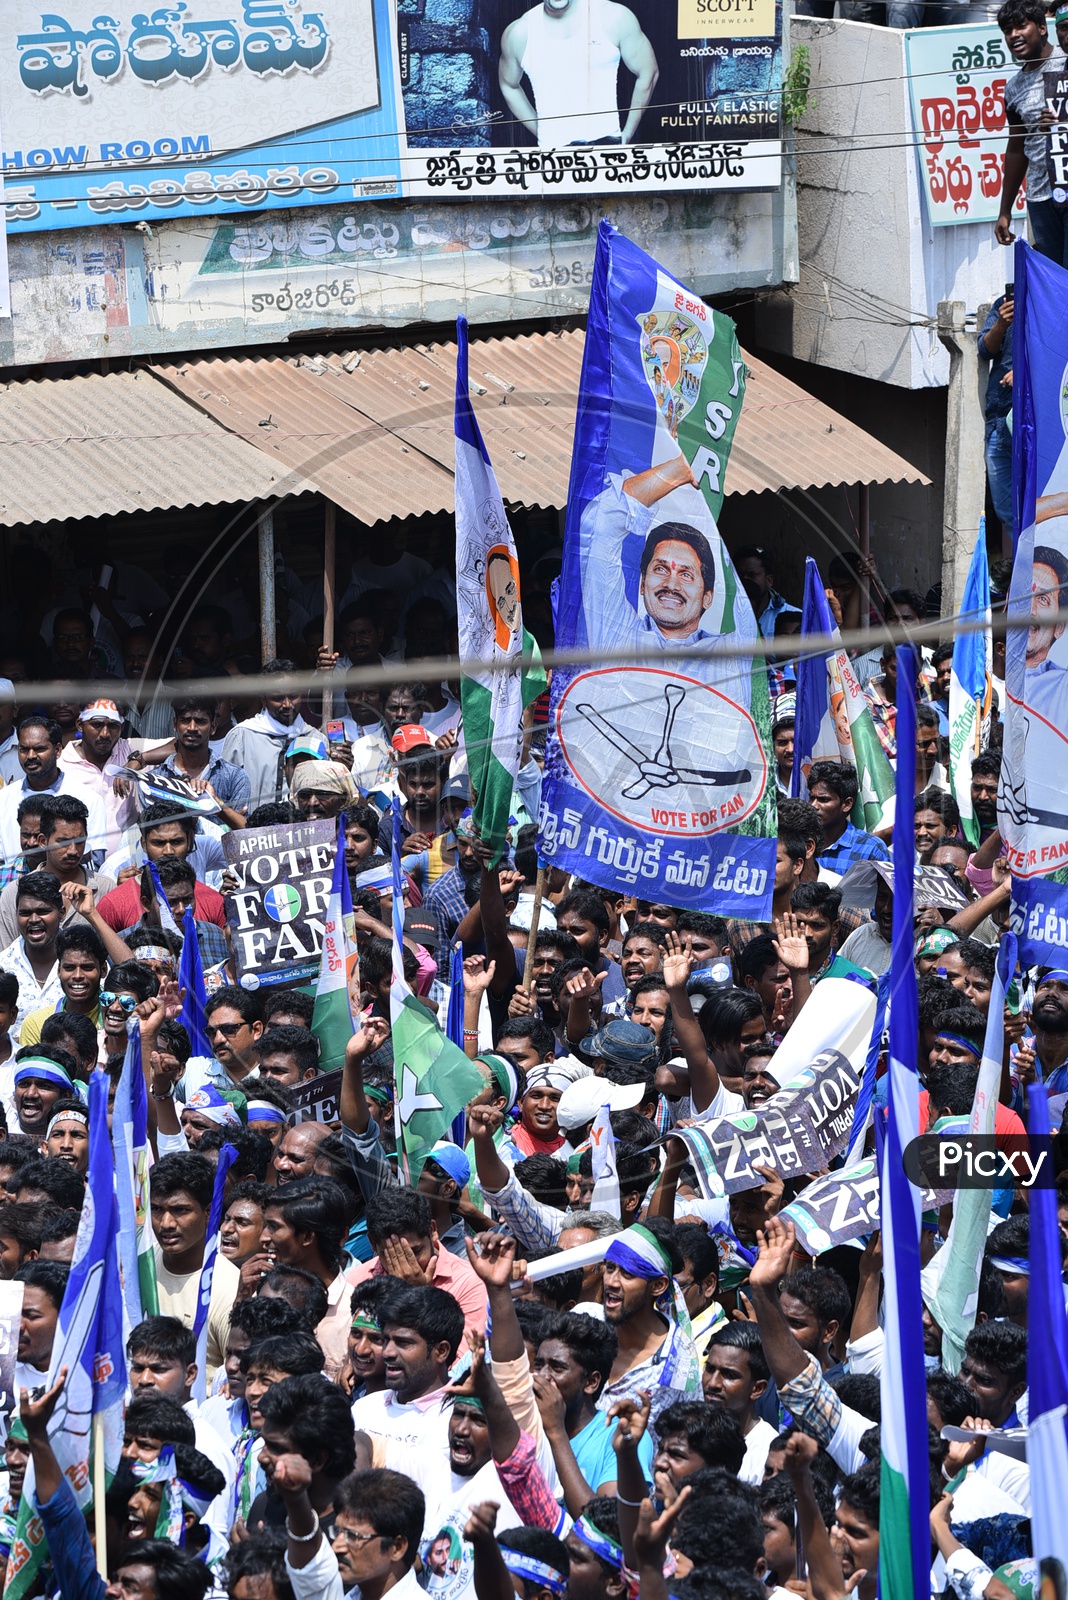 YSRCP Party Supporters With Party Flags During Election Campaign Rally